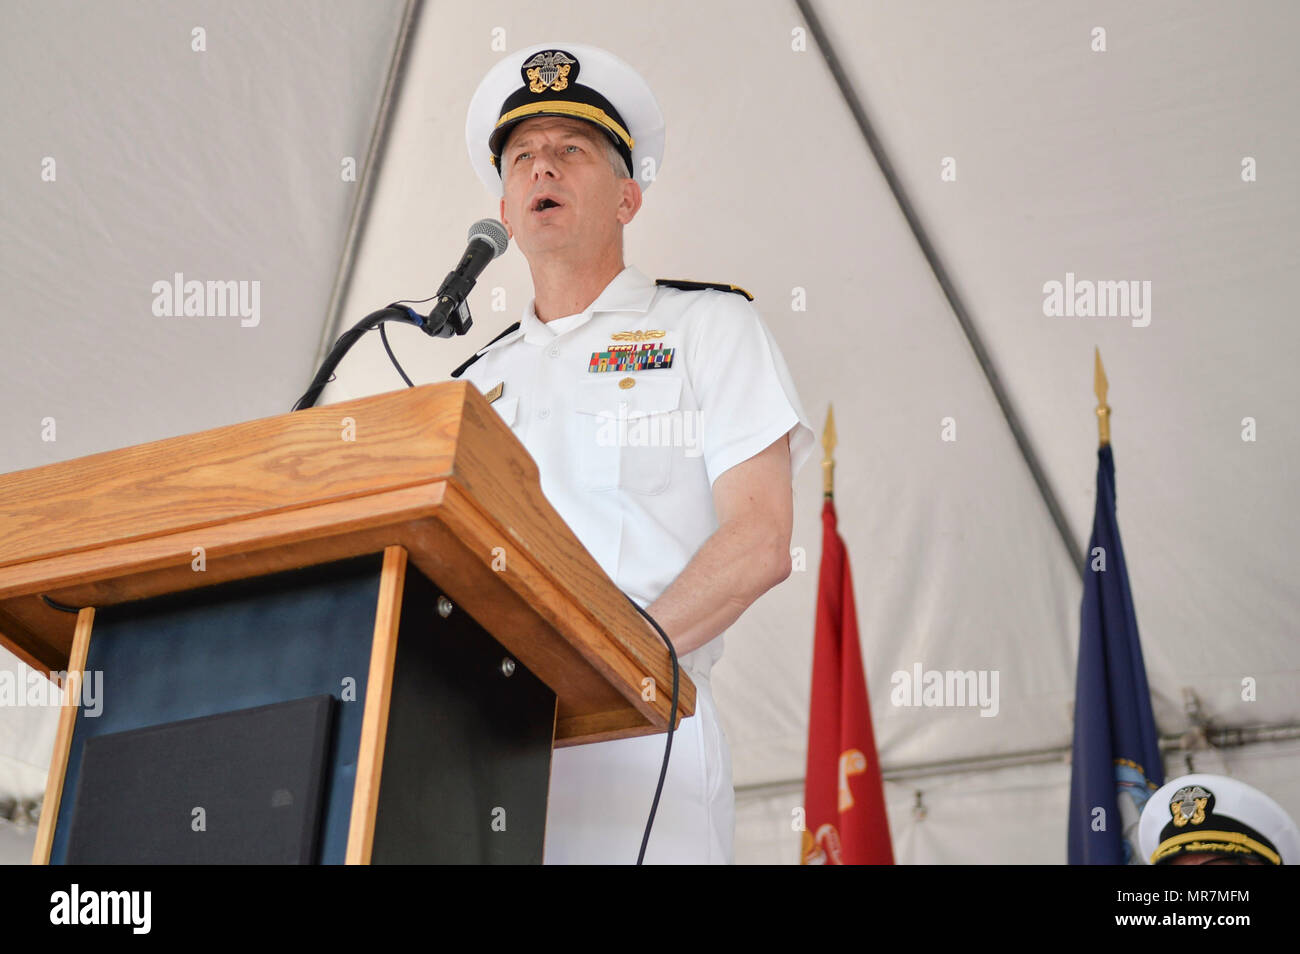 170517-N-IW246-122 SAN DIEGO (May 19, 2017) Rear Adm. Paul D. Pearigen, Commander, Navy Medicine West and chief of the Navy Medical Corps, speaks on the progress and growth of Naval Medical Center San Diego (NMCSD) at NMCSD’s centennial ceremony. The ceremony was held to celebrate NMCSD’s 100th birthday. The Navy’s first permanent medical facility in San Diego was established in Balboa Park on May 20, 1917. (Photo by Culinary Specialist Petty Officer 2nd Class Luther C. Smith Jr./Released) Stock Photo